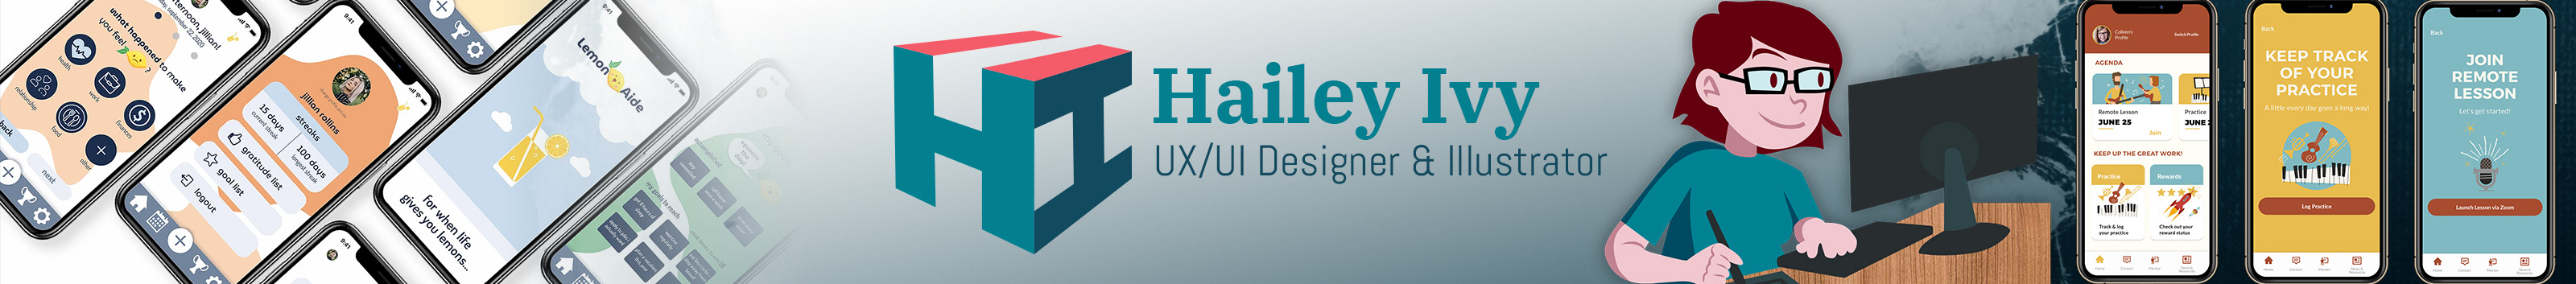 Hailey Ivy's profile banner